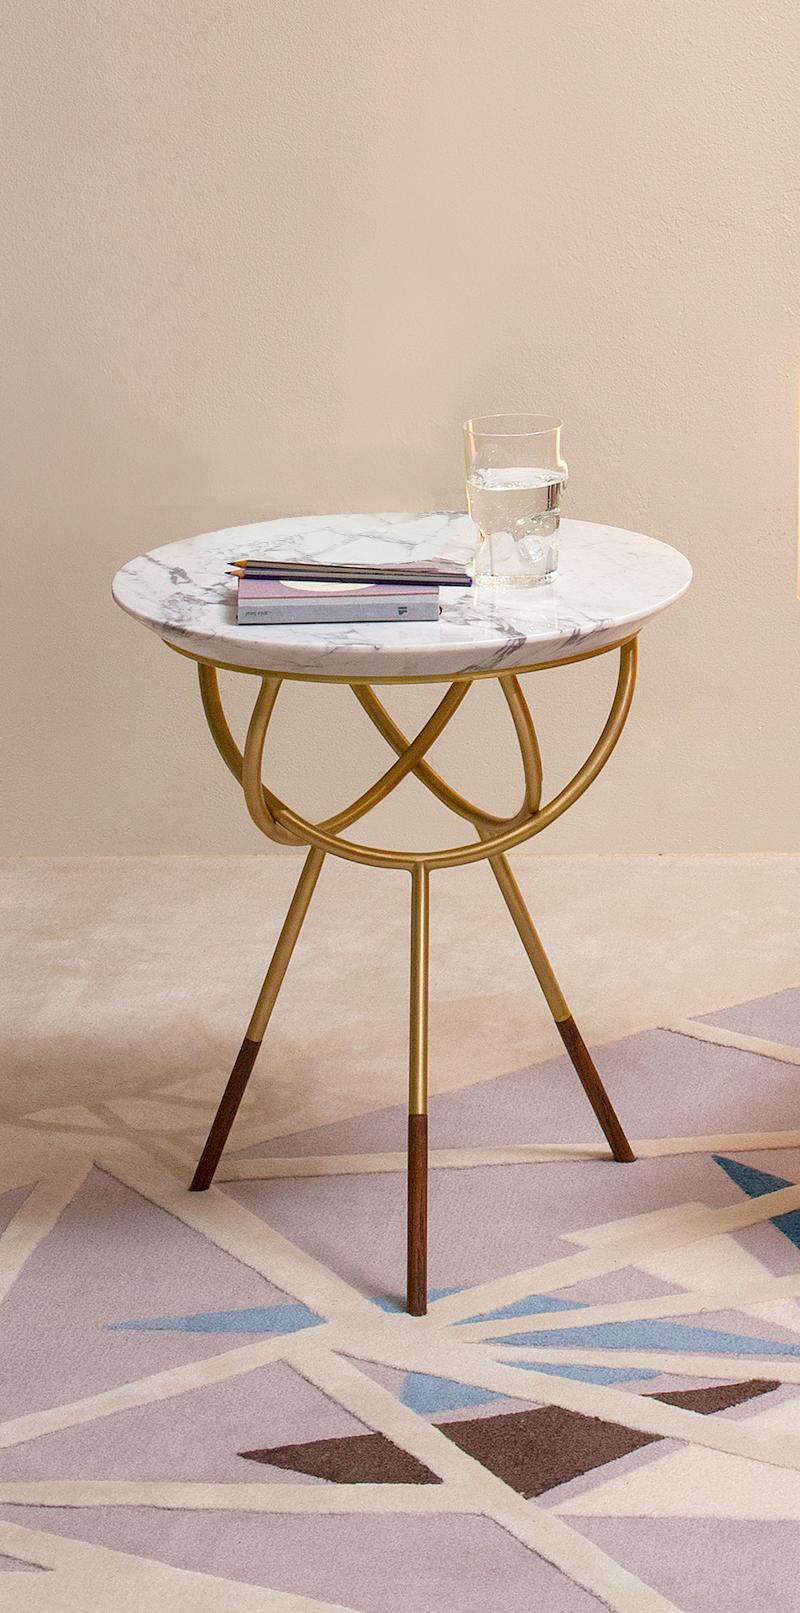 Contemporary Atlas Brushed Brass End Table with Black Marble Top by Avram Rusu Studio For Sale